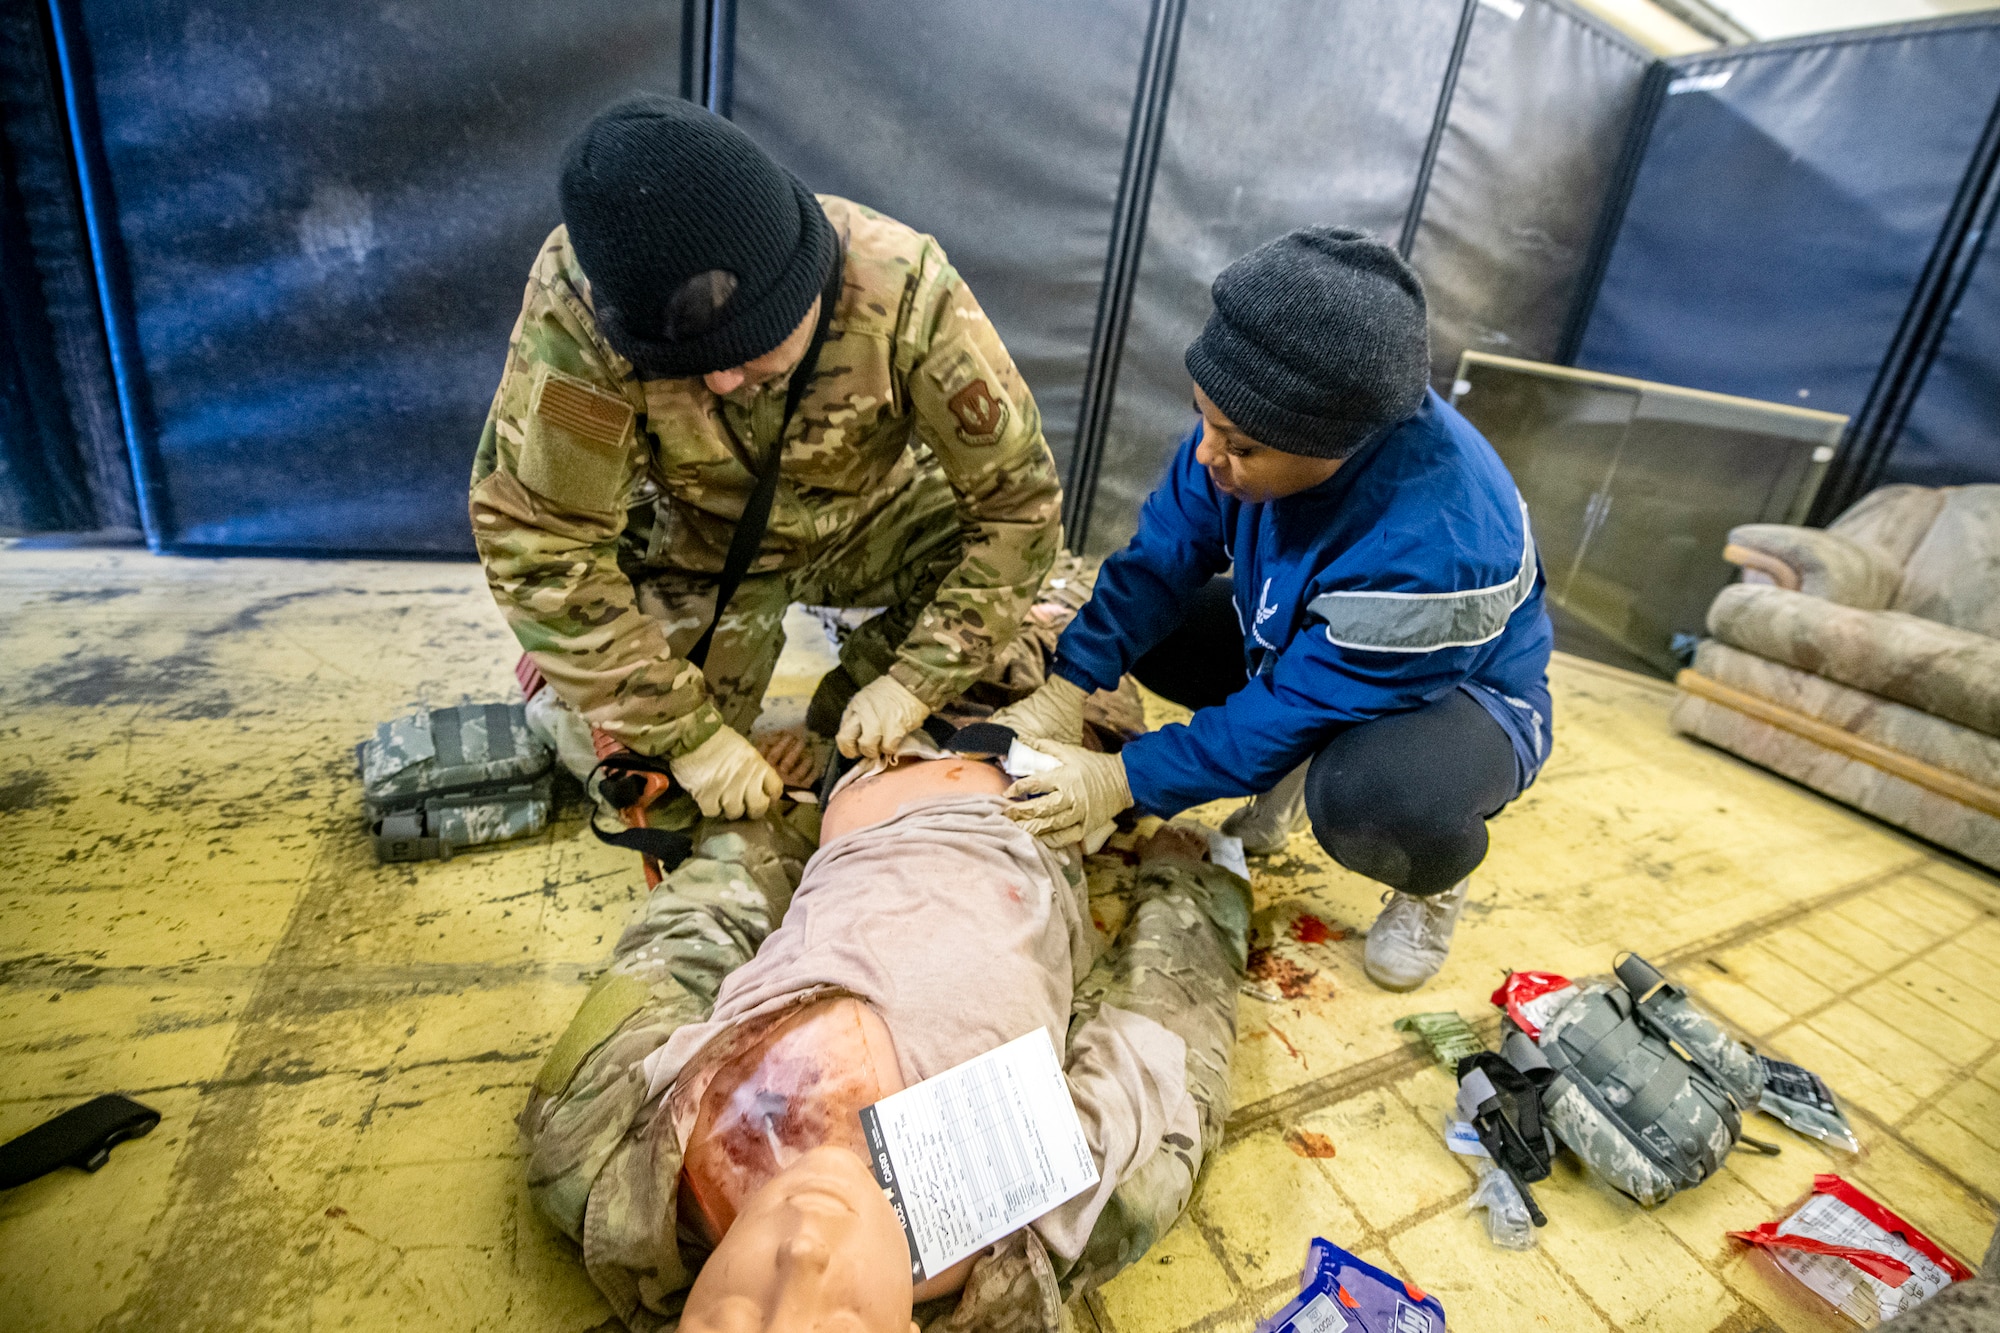 Airmen from the 423d Medical Squadron apply tactical combat casualty care to a simulated victim during an active shooter exercise at RAF Molesworth, England, Dec. 16, 2022. The 423d MDS and Security Forces Squadrons conducted the exercise to evaluate their overall readiness and response capabilities to an emergency situation. (U.S. Air Force photo by Staff Sgt. Eugene Oliver)